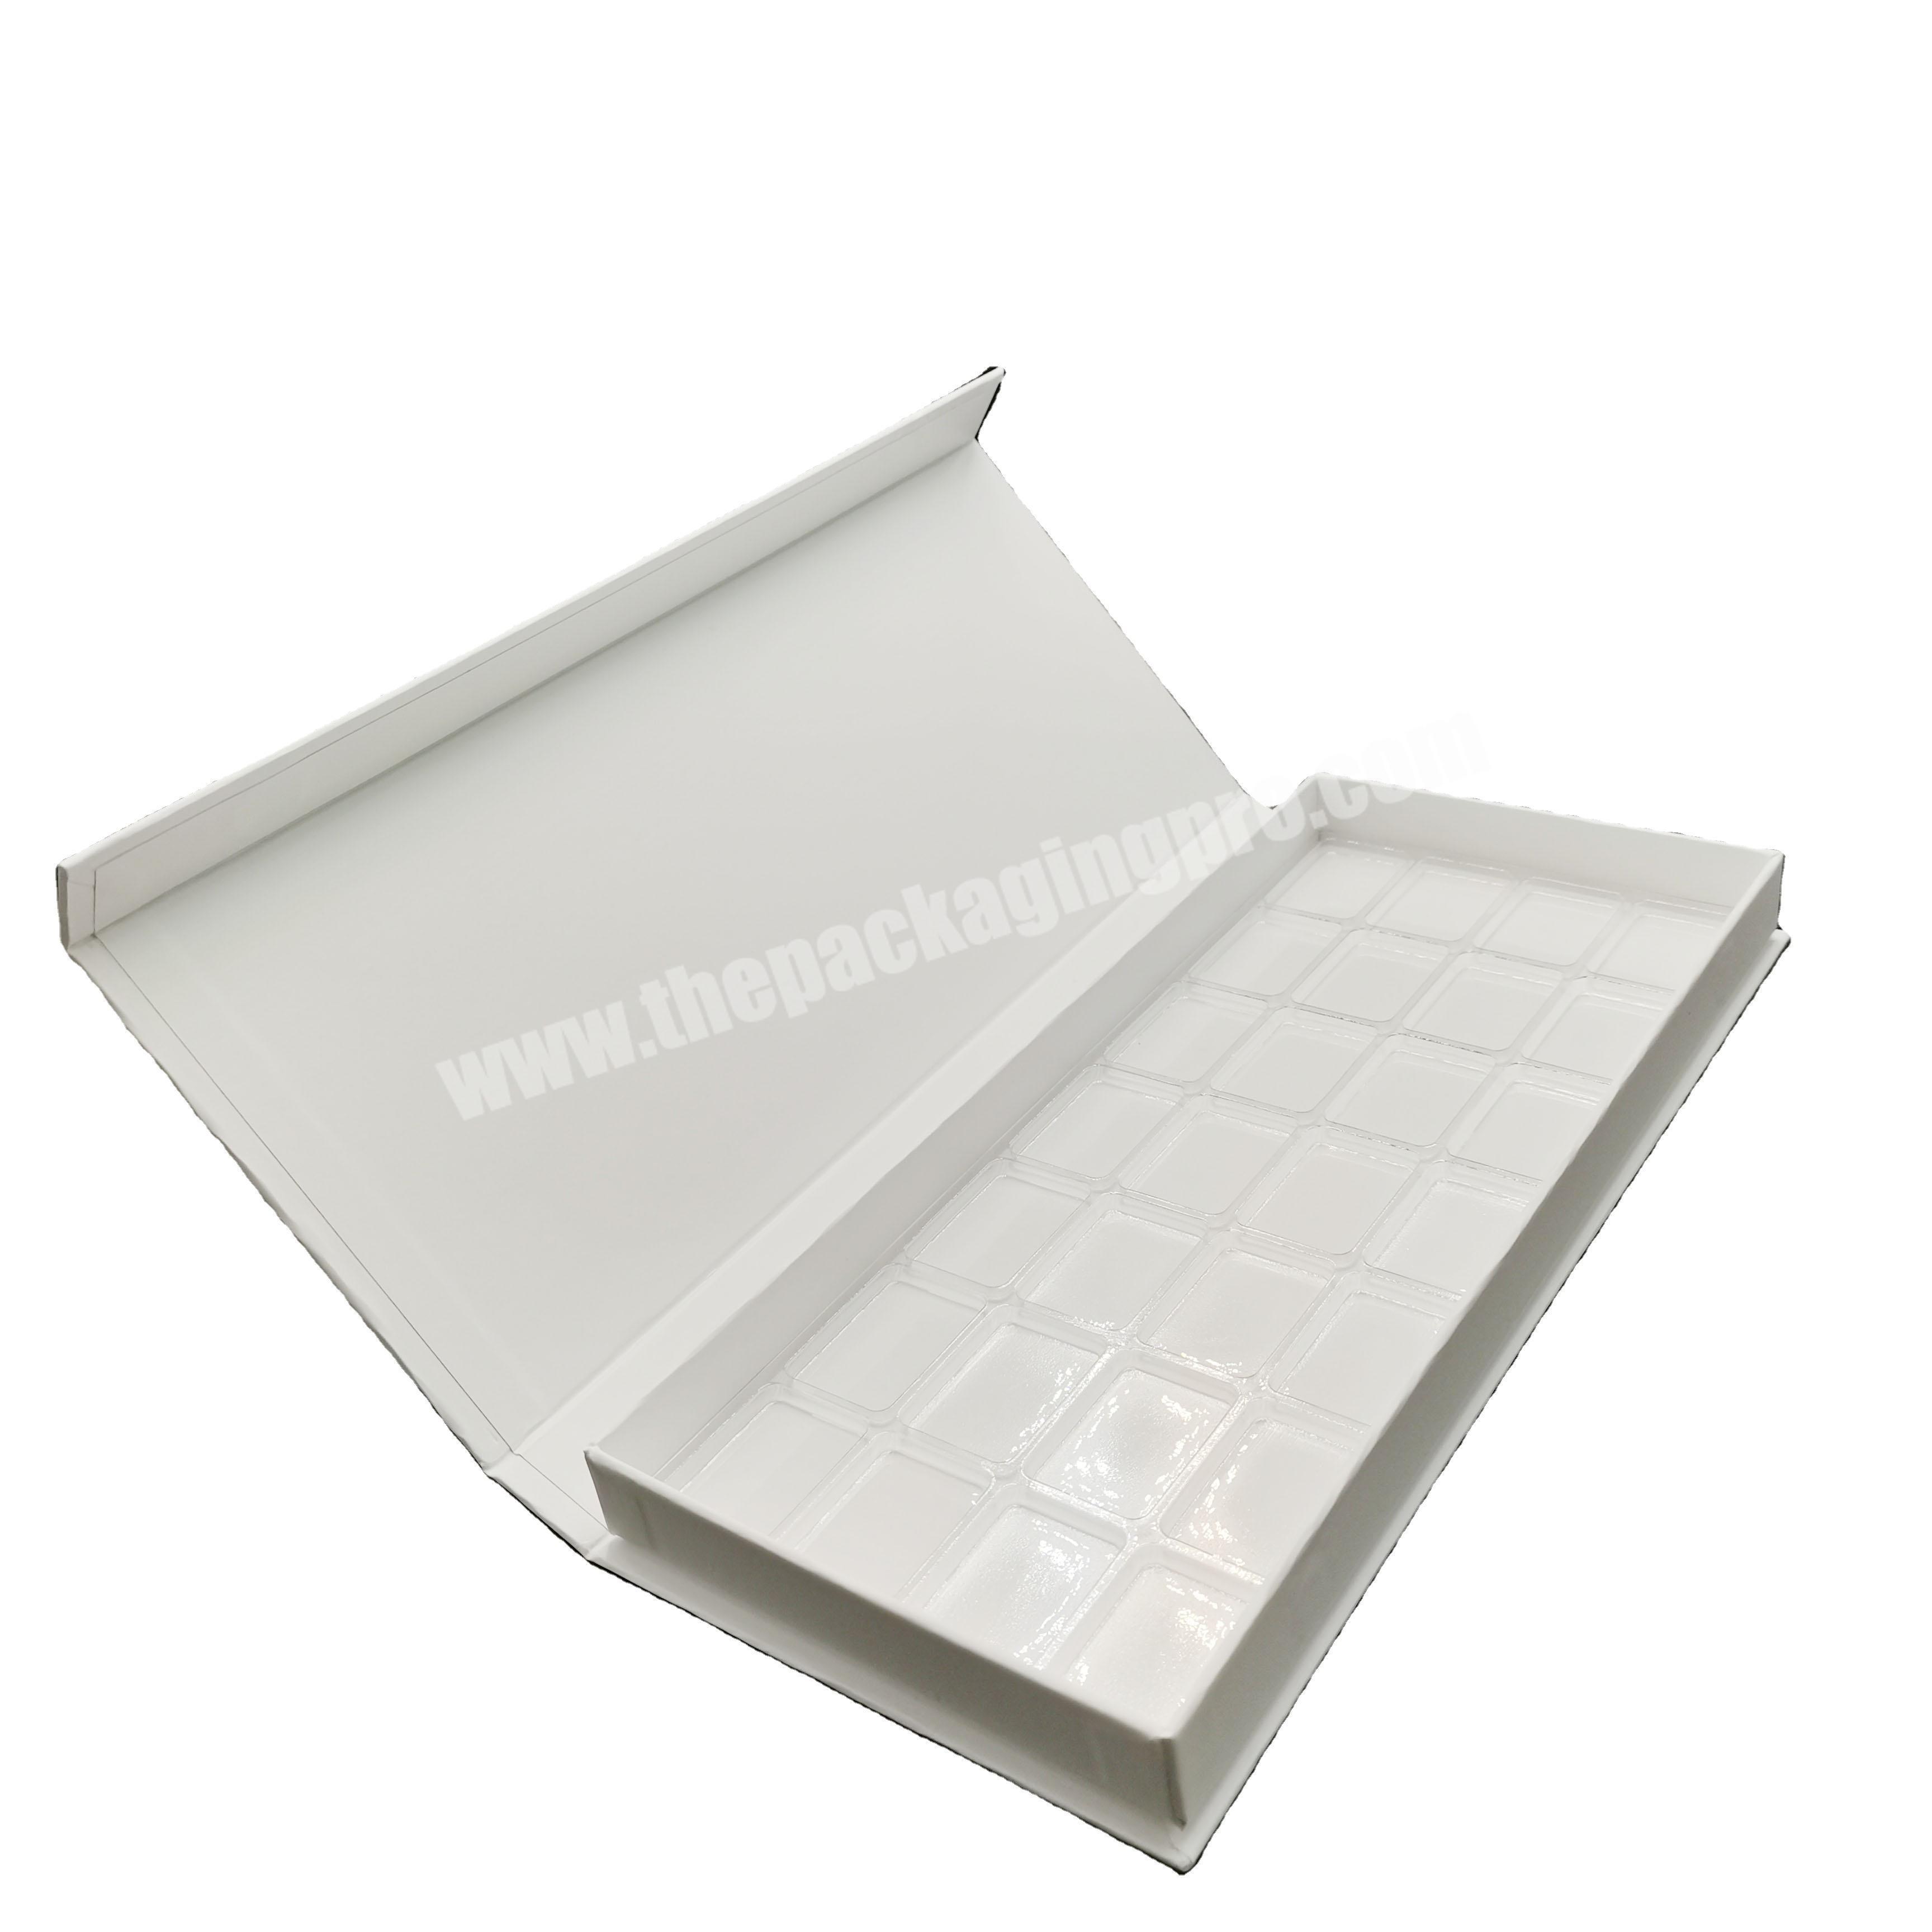 Luxury cardboard magetic book shape white branded design decorative chocolate box with spot UV and silver stamping